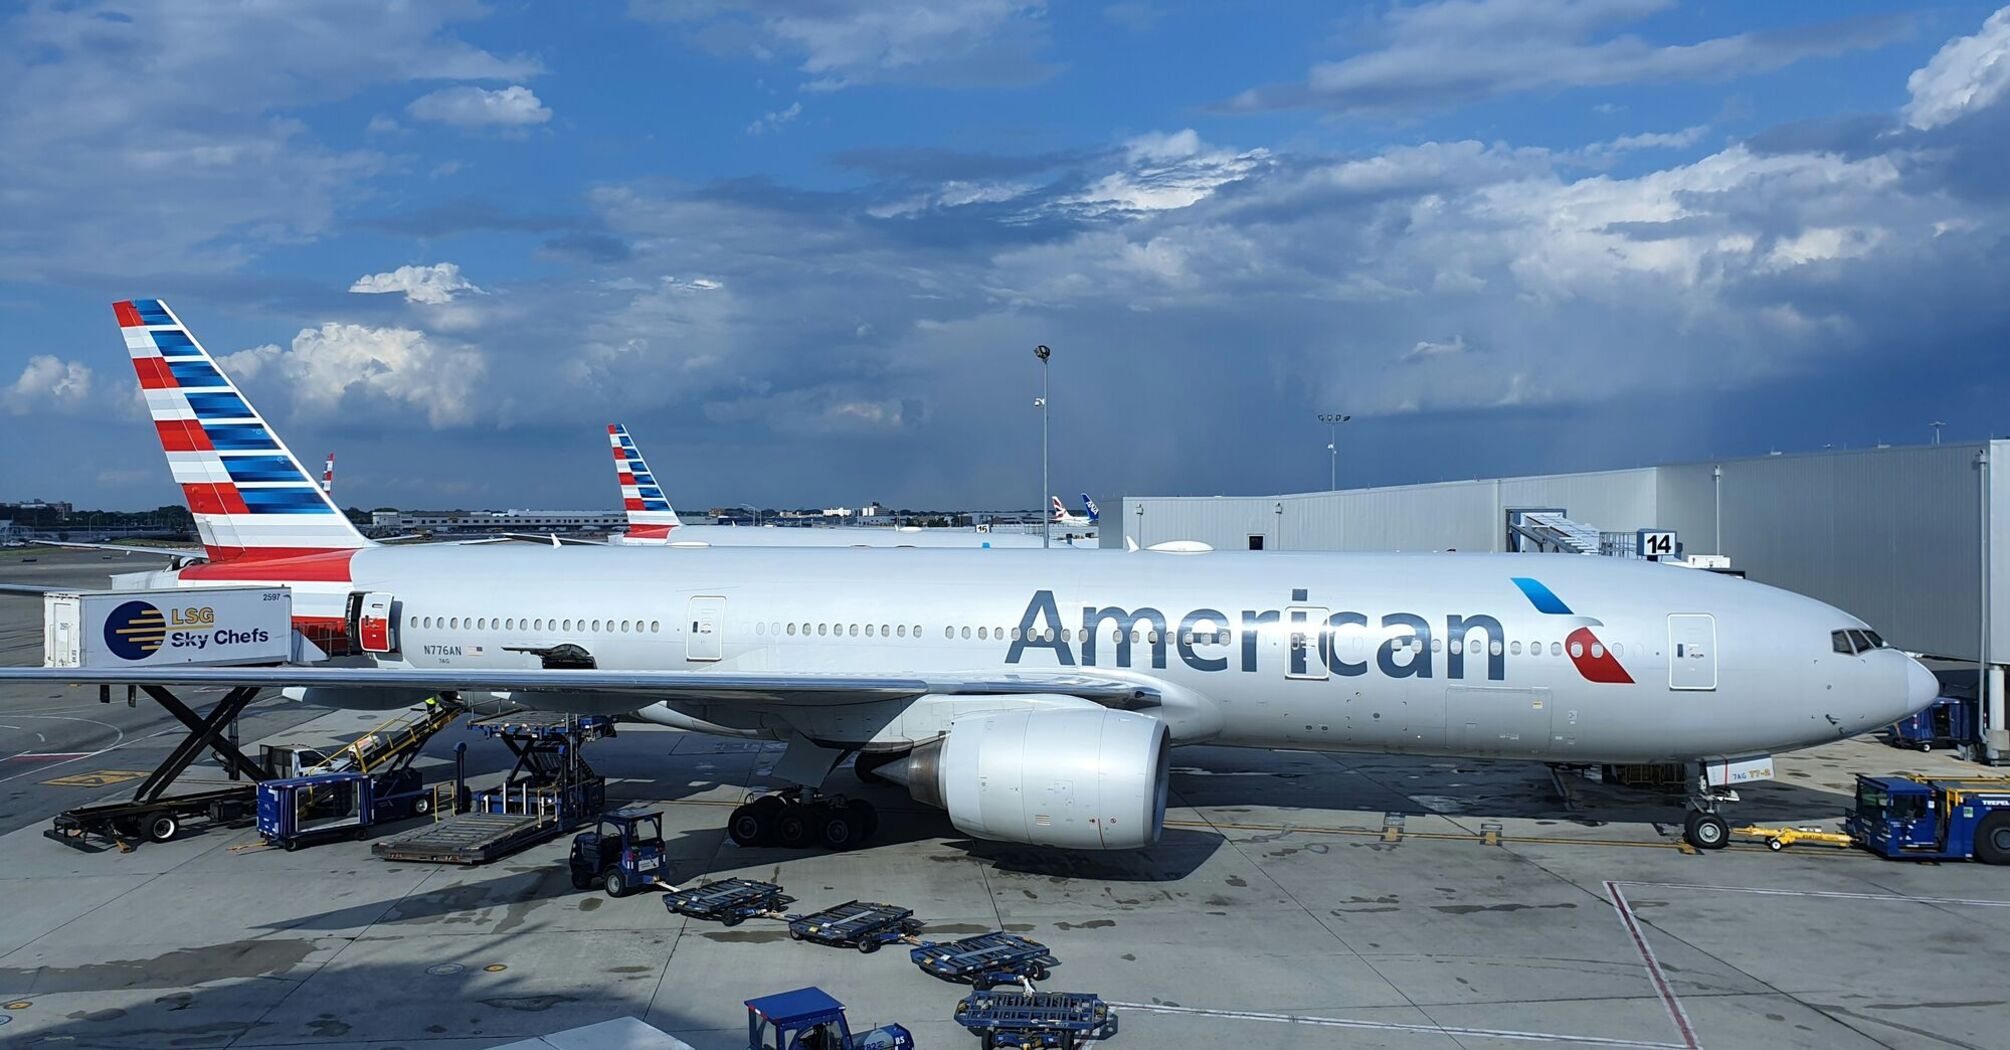 An American Airlines plane being loaded with cargo at an airport terminal, set against a backdrop of a partially cloudy sky